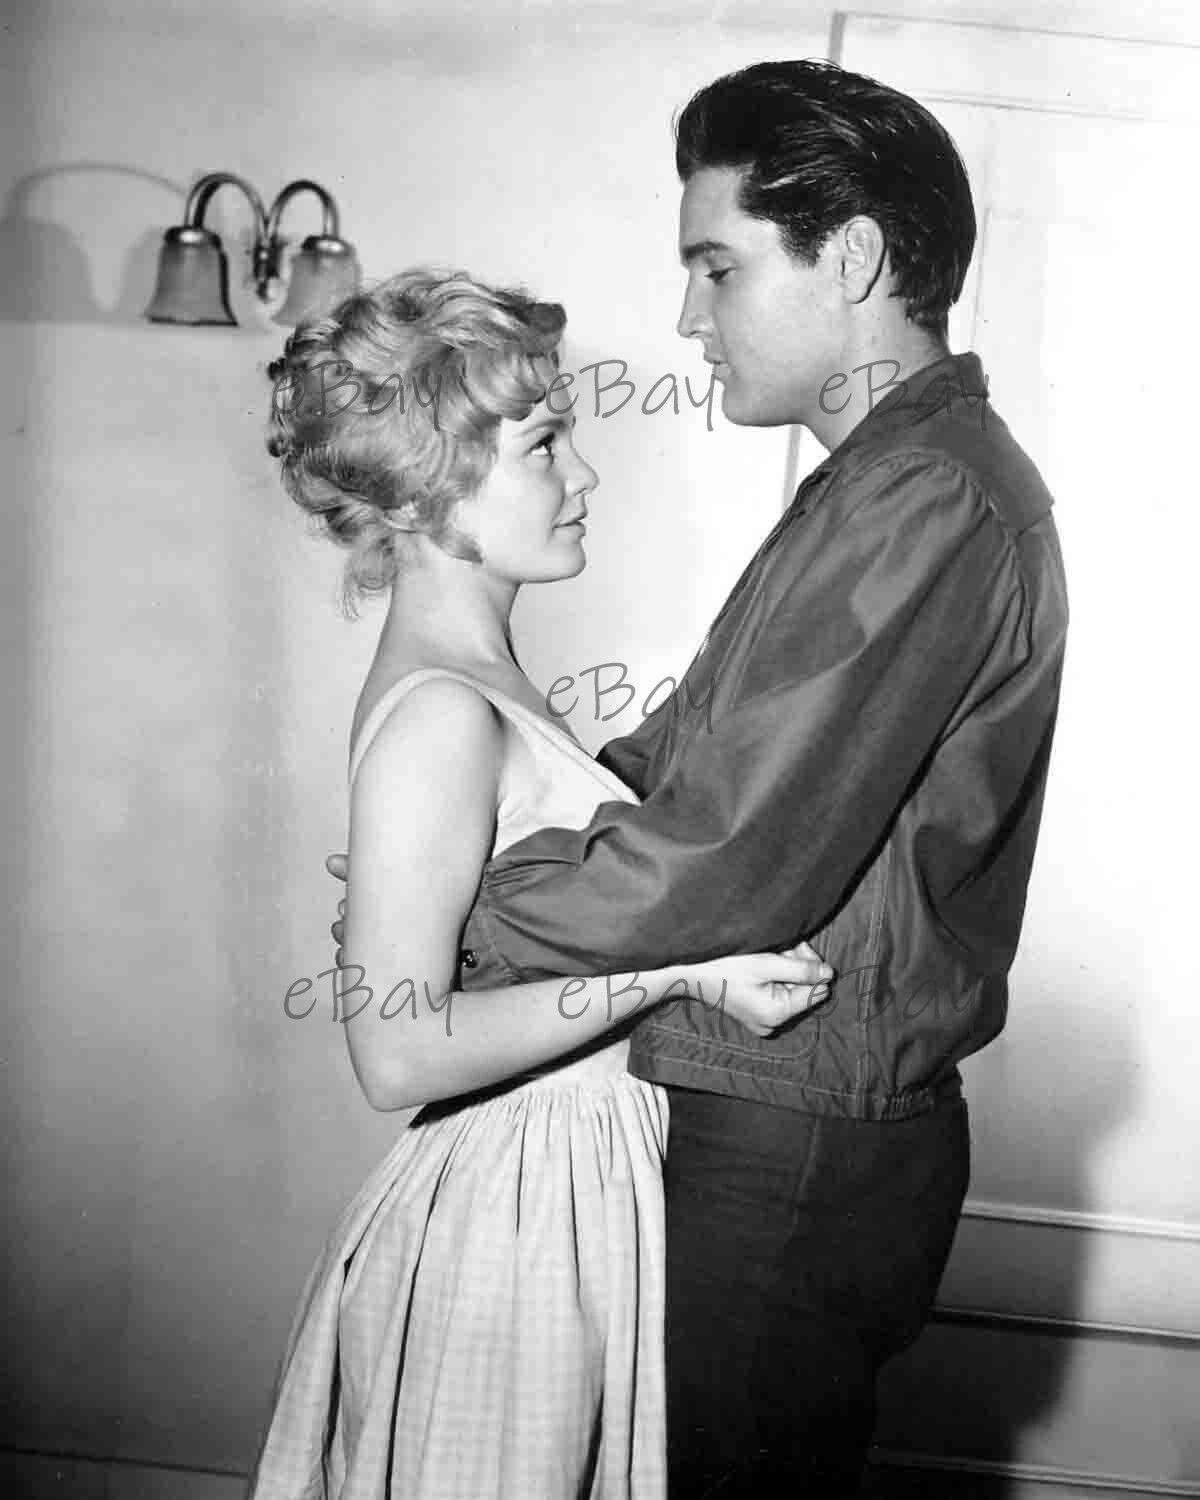 Elvis Presley & Tuesday Weld - Wild in the Country 8x10 Photo Reprint